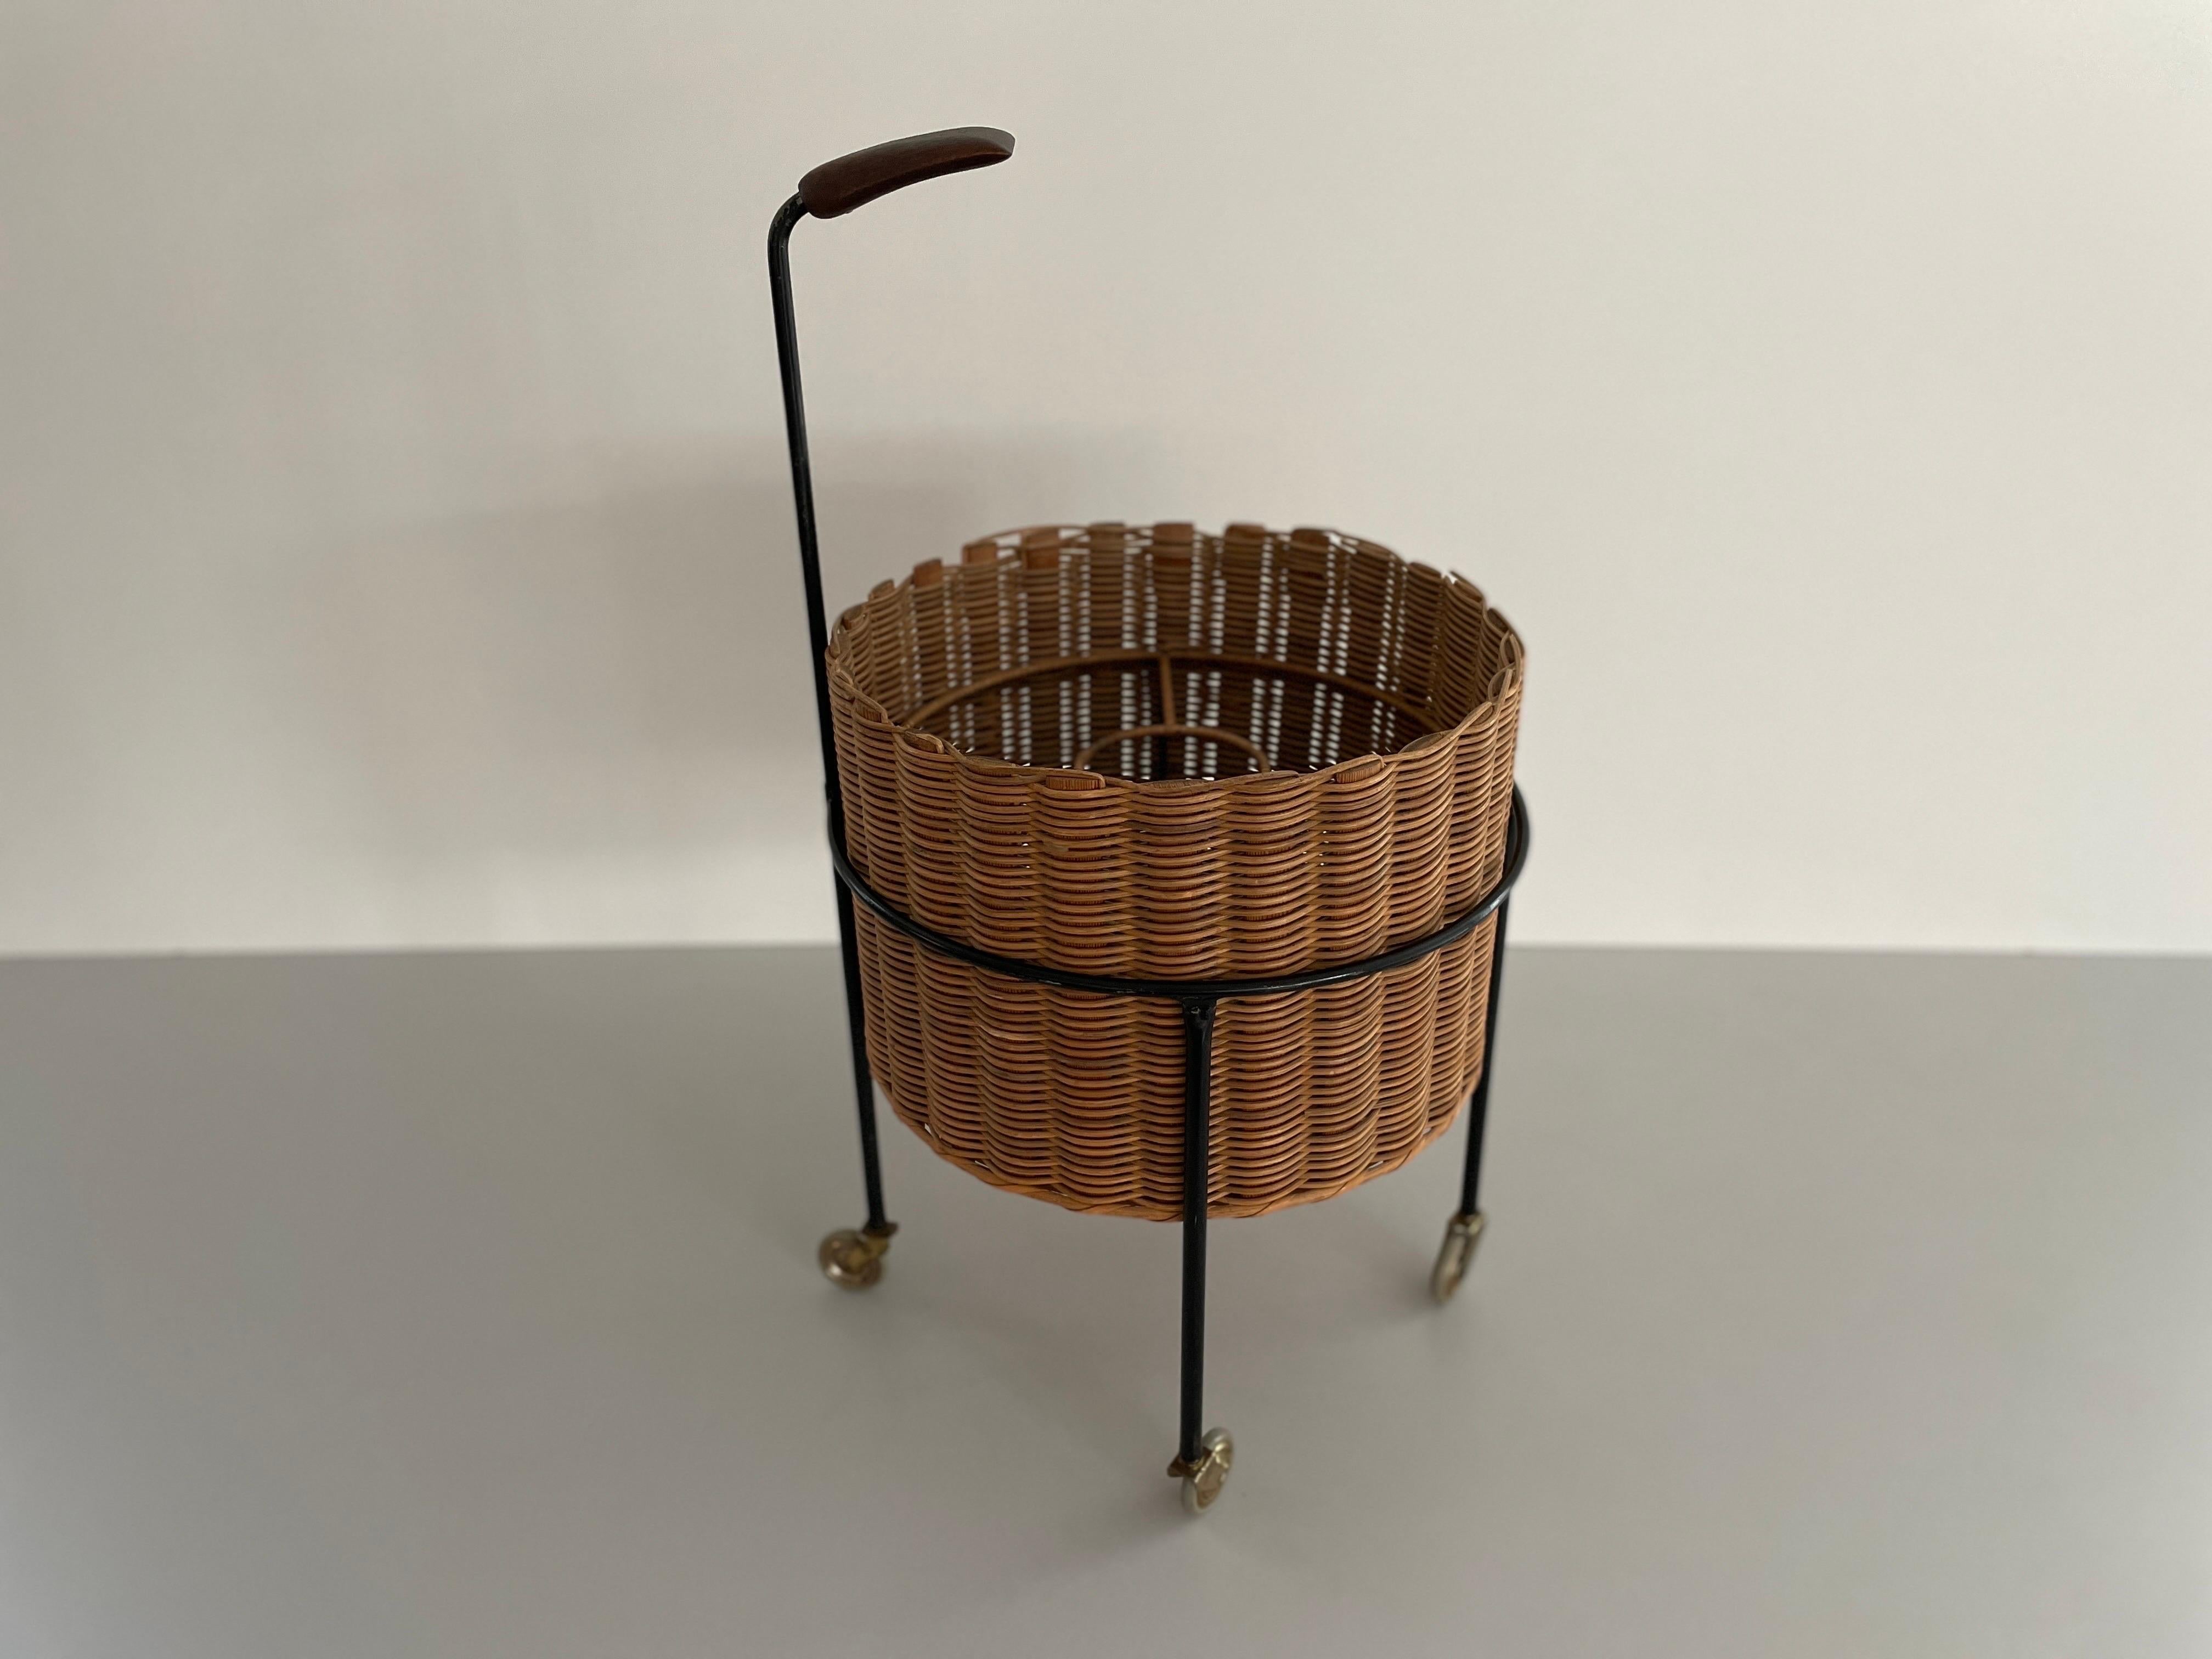 Wicker and Black Metal Serving Bar Cart Bottle Holder, with Teak Handle
1960s, Germany

It is very ideal and suitable for all living areas.

No damage, no crack.
Wear consistent with age and use.

Measurements: 
Height with handle: 72 cm
Height: 47